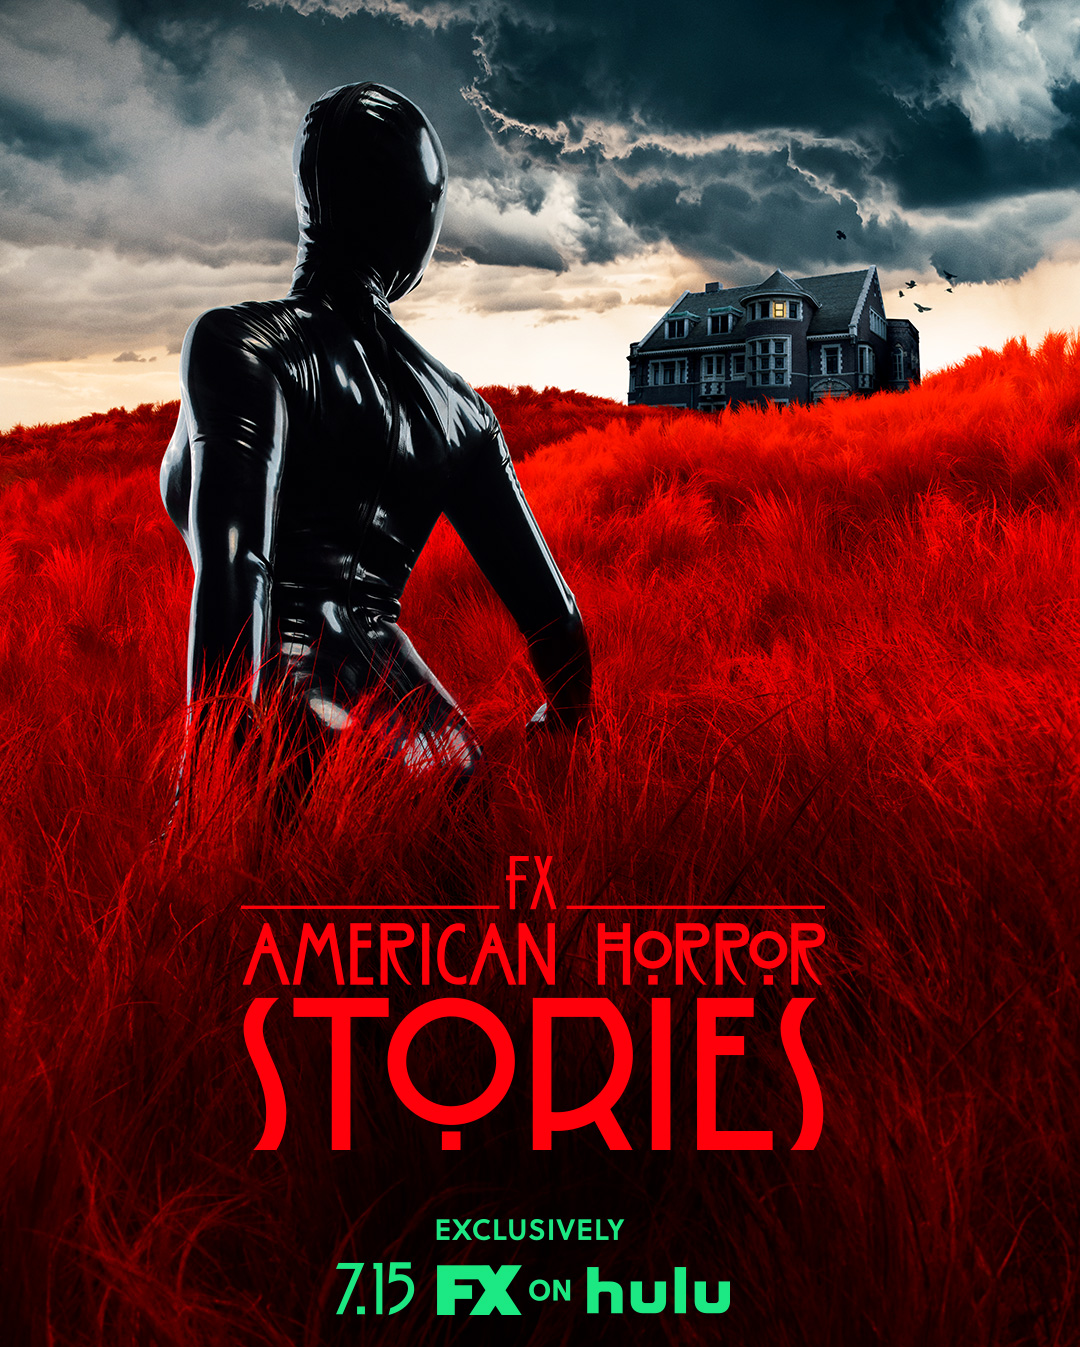 “American Horror Stories”: The first trailer presents a 1-minute preview of FX’s spinoff series